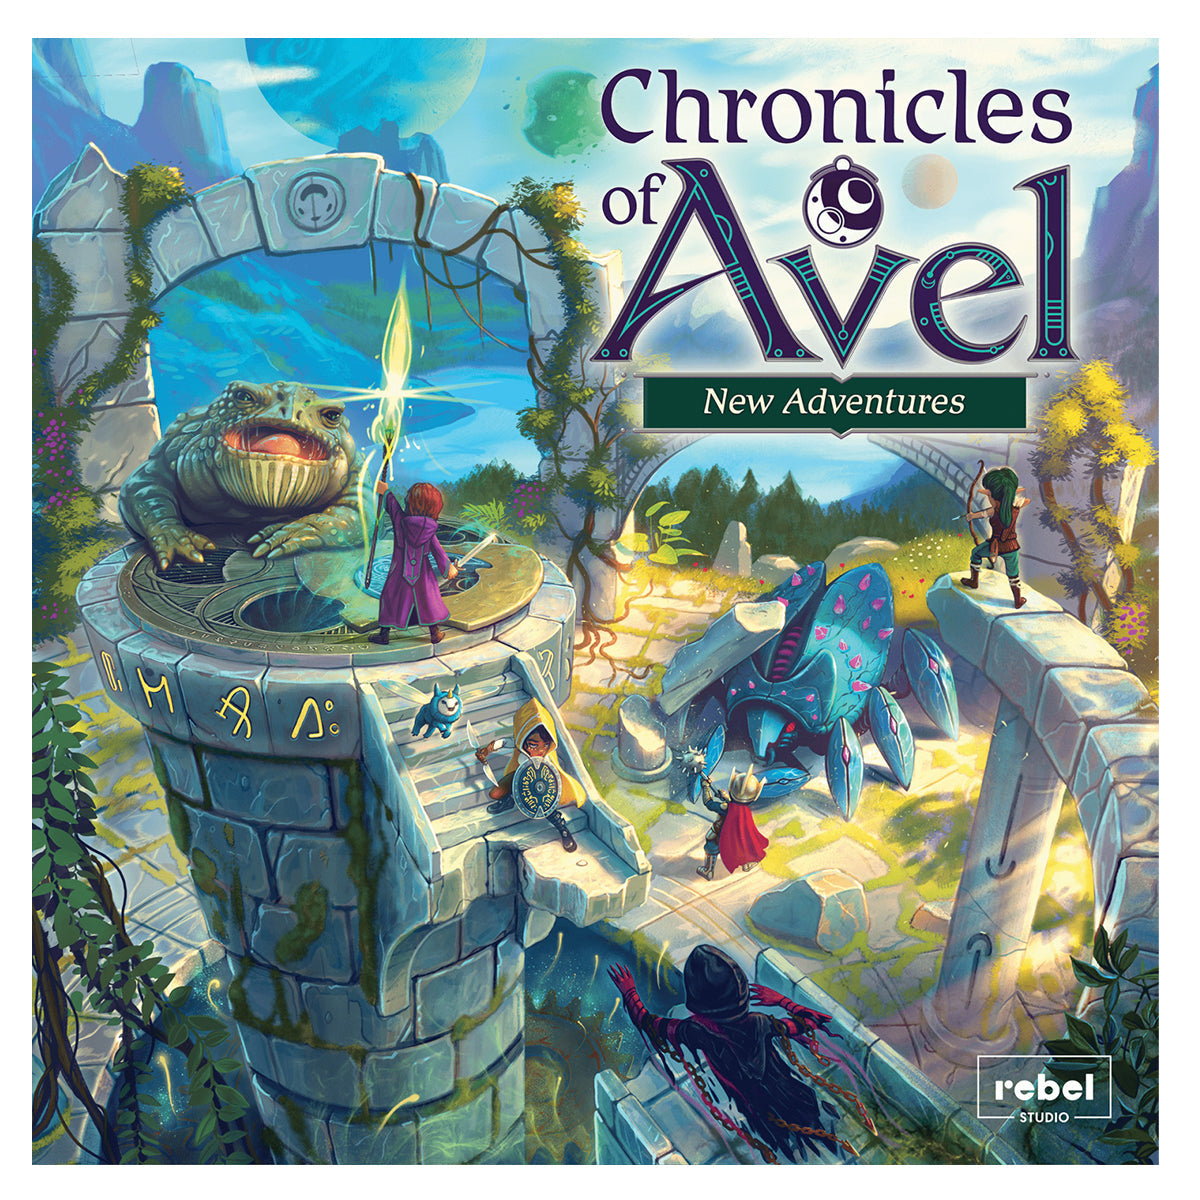 New Adventures Expansion - Chronicles of Avel